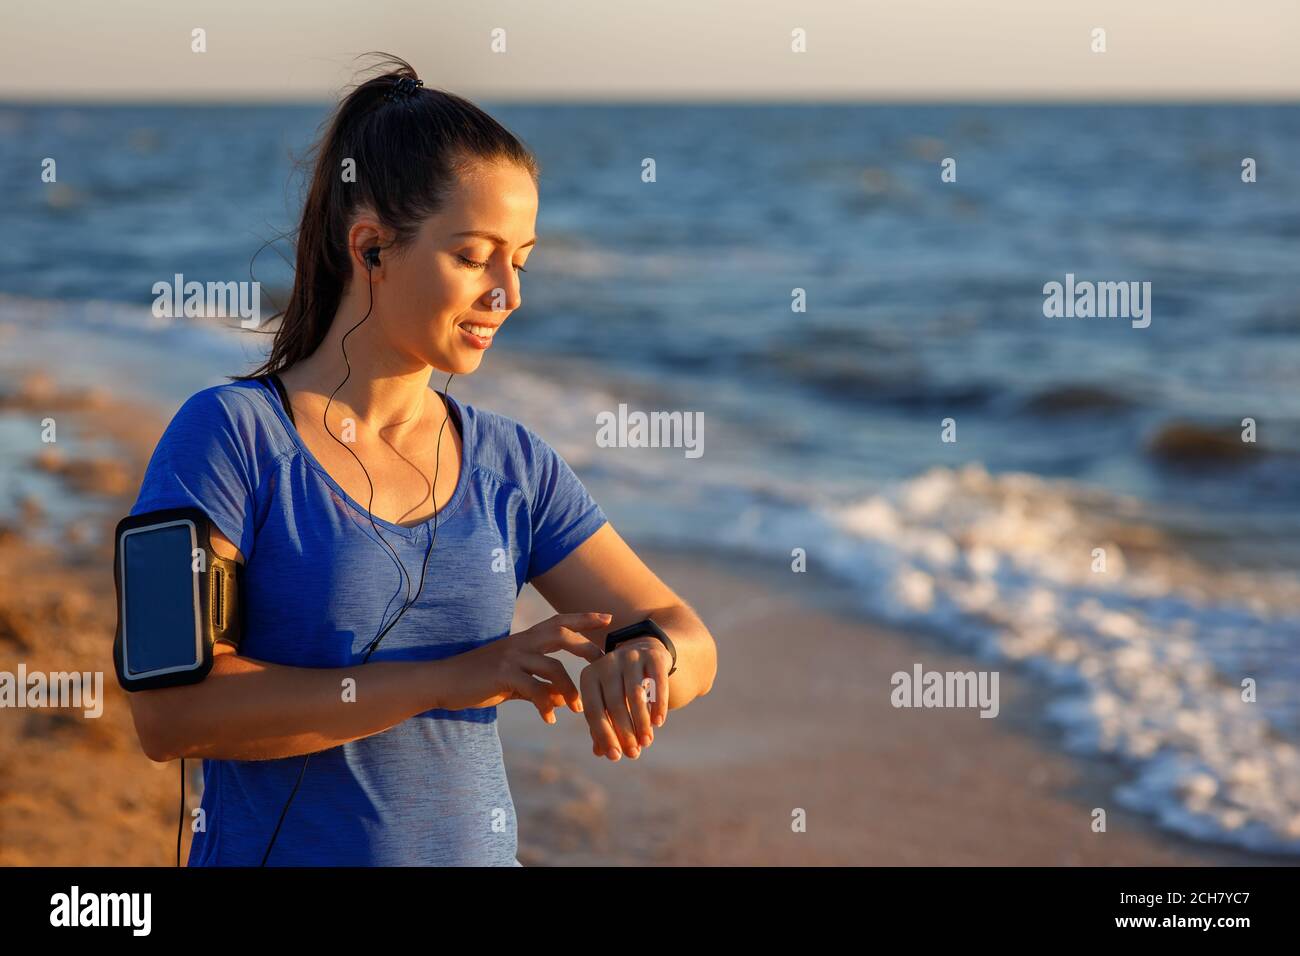 woman checking distance and heart rate Stock Photo